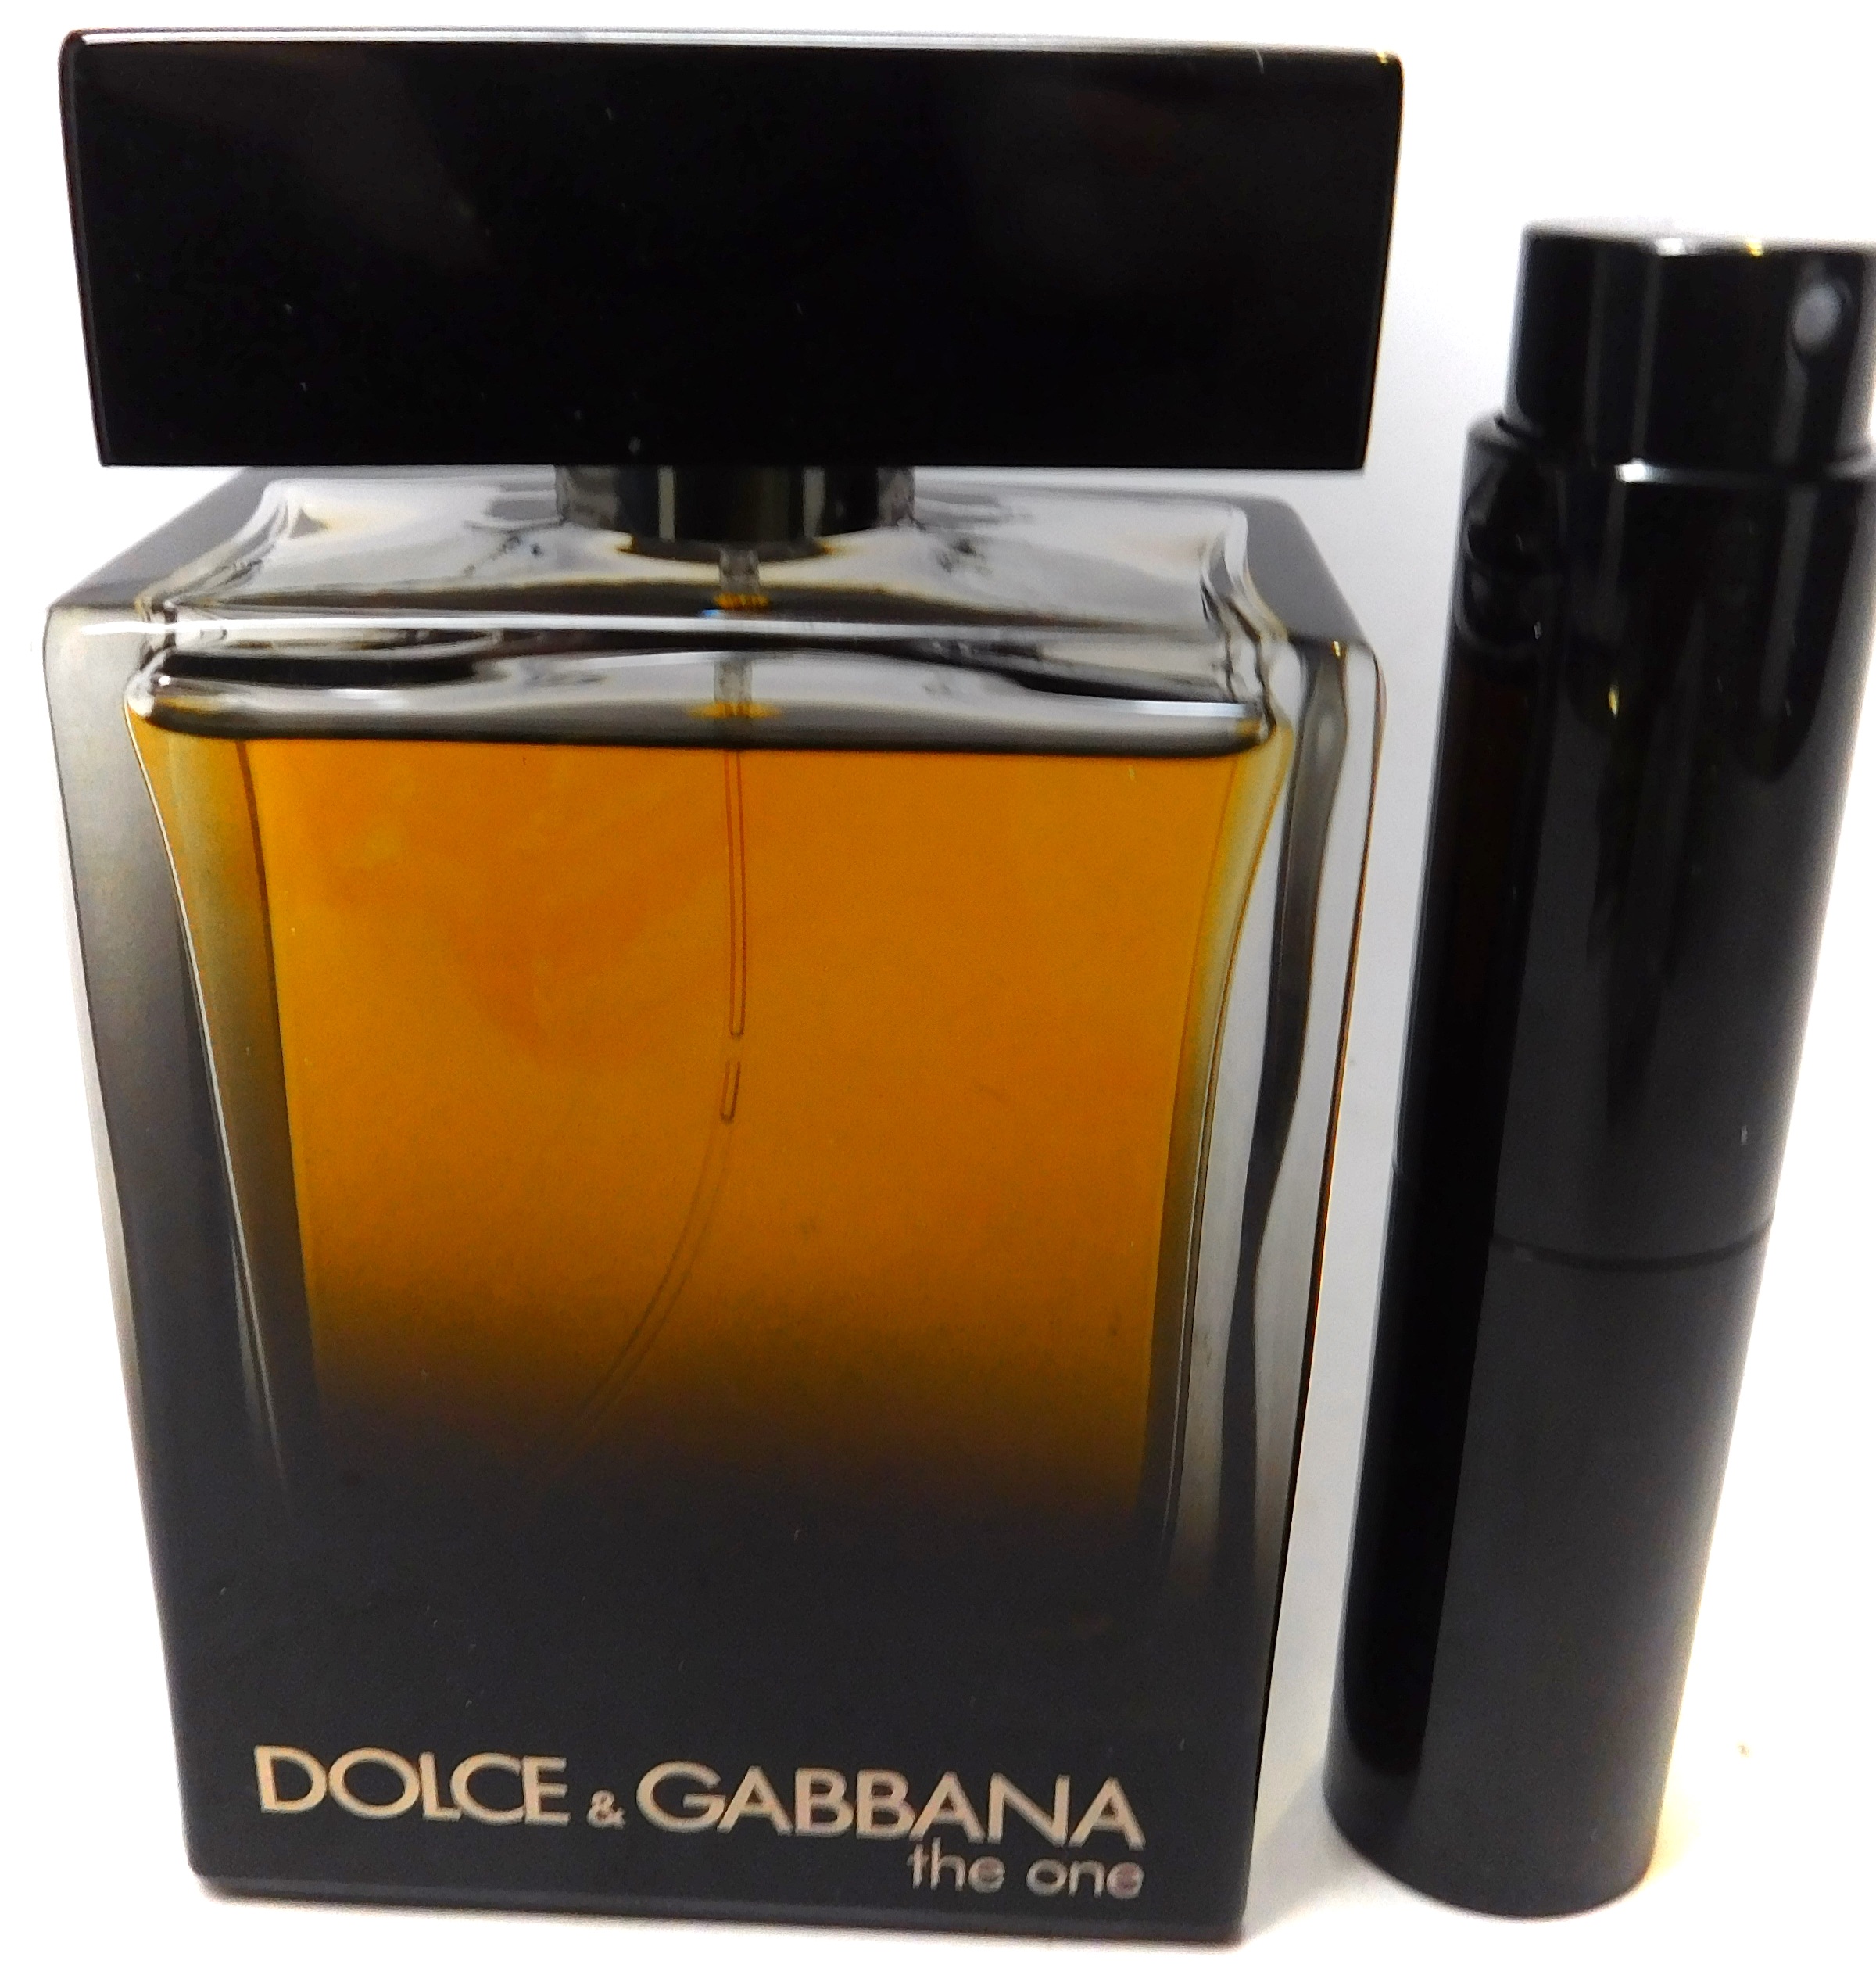 dolce and gabbana the one edp